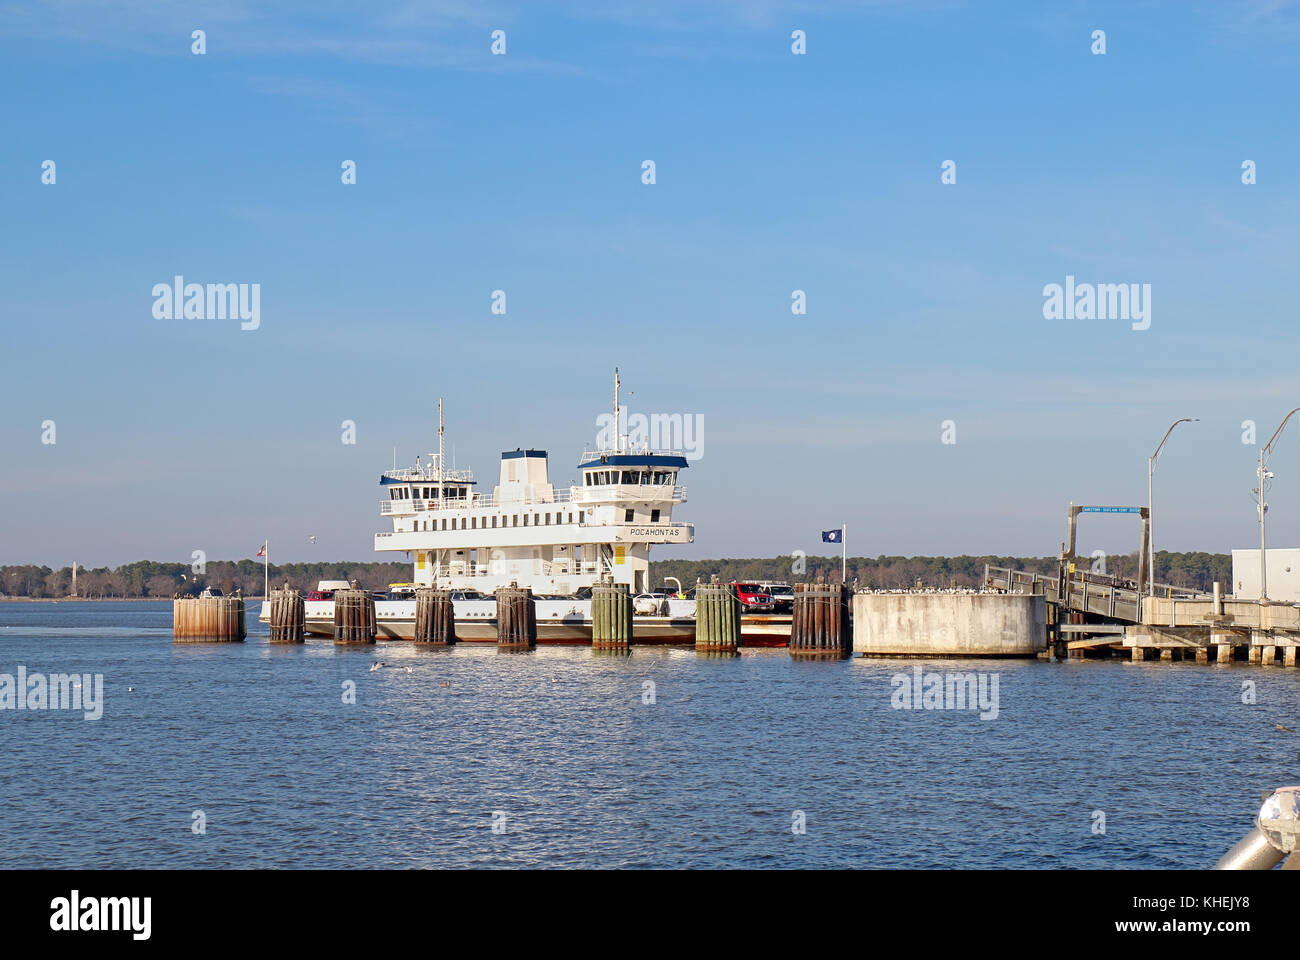 SCOTLAND, VIRGINIA - FEBRUARY 20 2017: Ferry boat Pocahontas at the Jamestown-Scotland Ferry, which runs between Jamestown Island and Surrey. This his Stock Photo